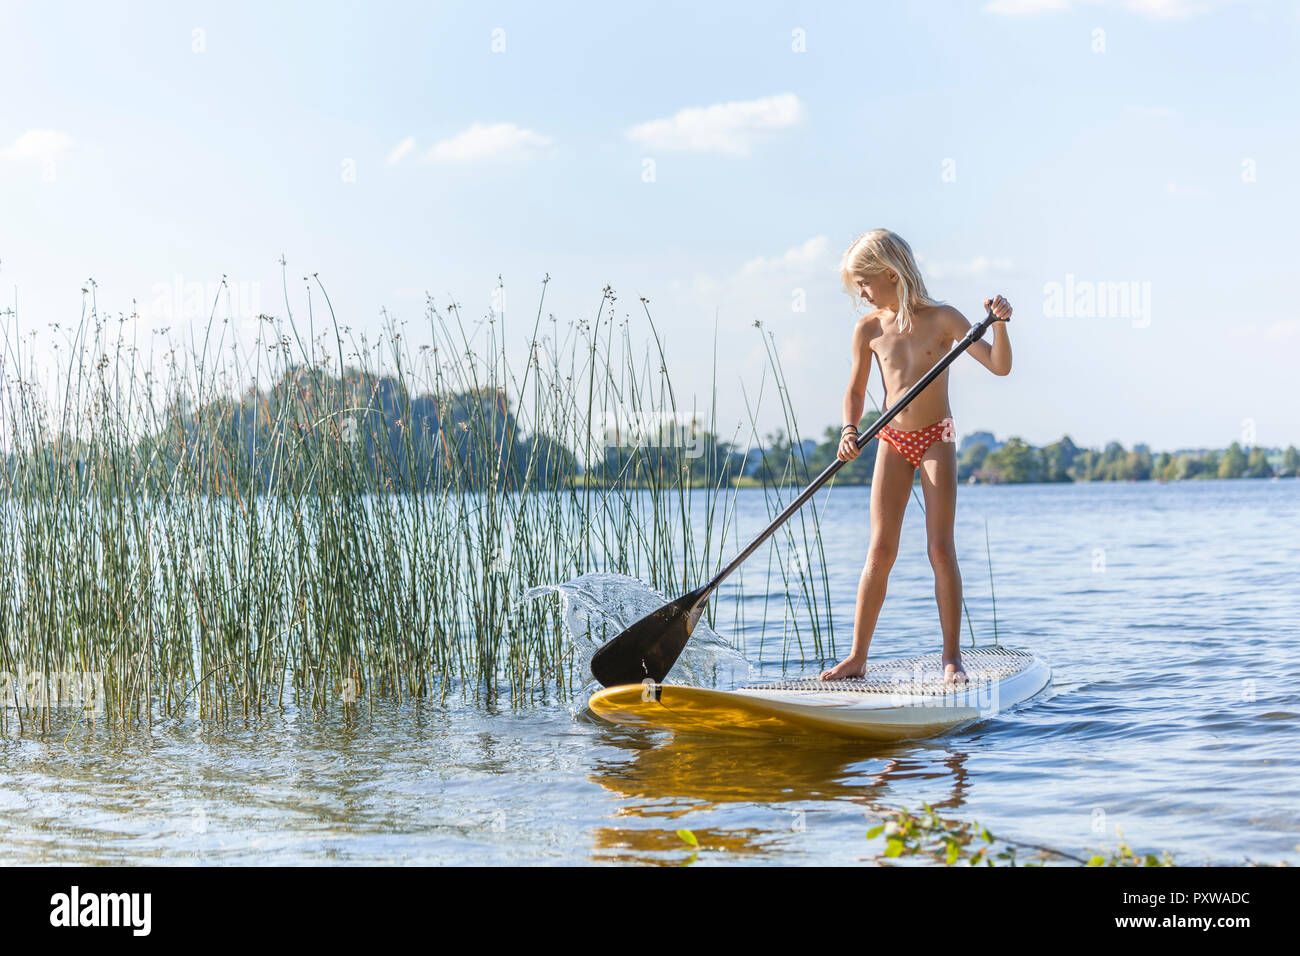 Junge Mädchen Stand Up Paddle Surfing Stockfoto